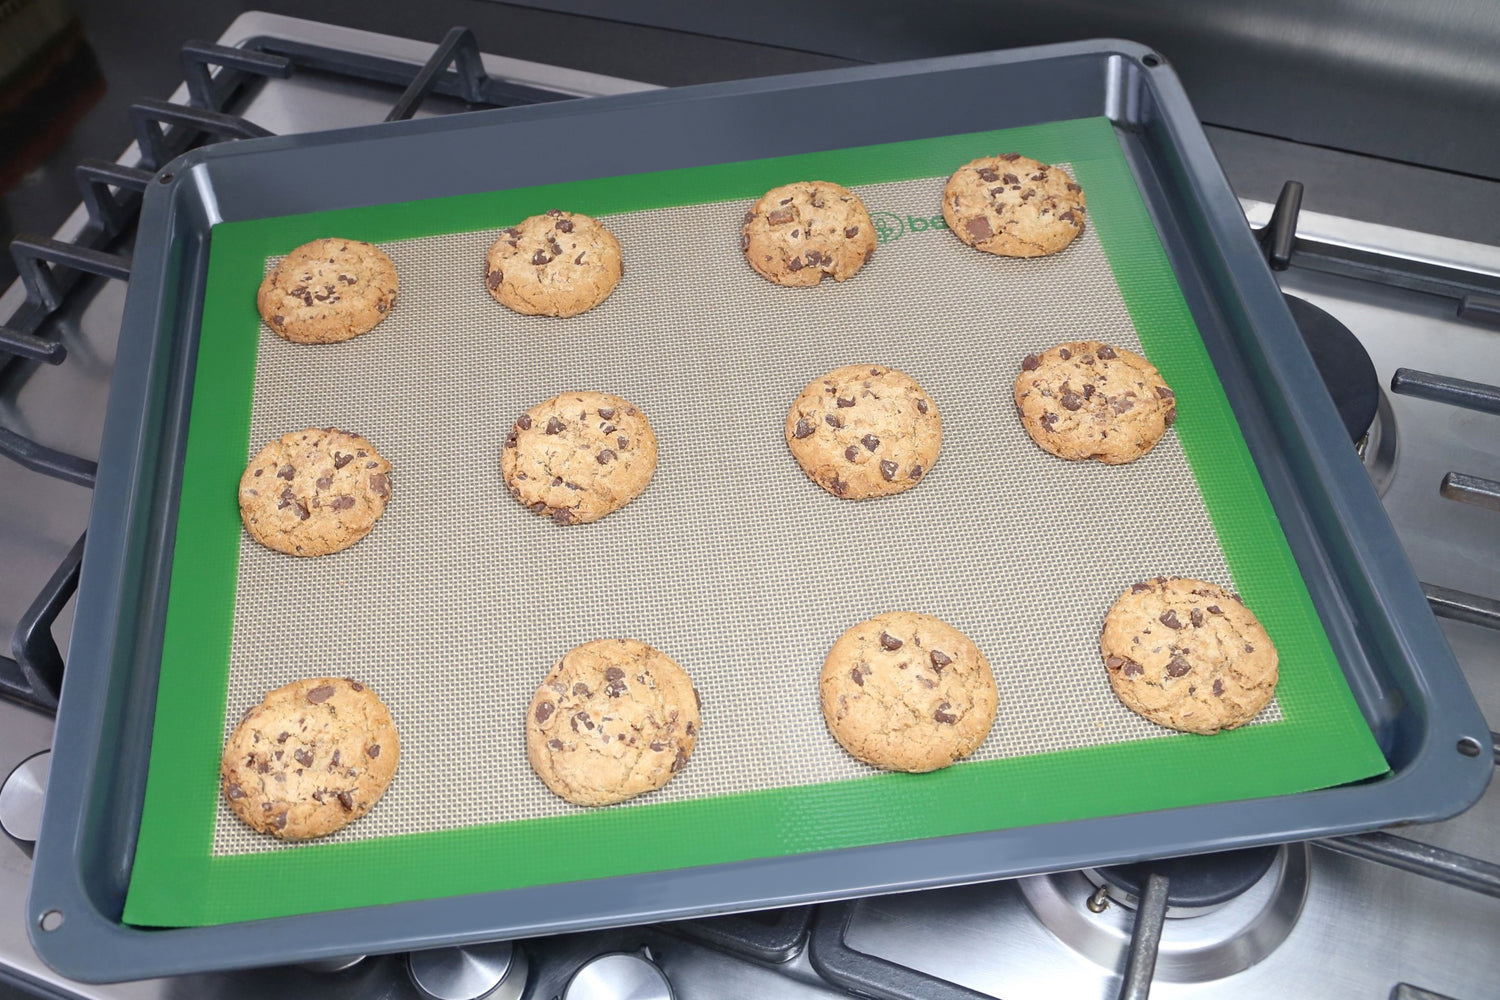 reusable silicone baking mat made in europe being used to bake cookies